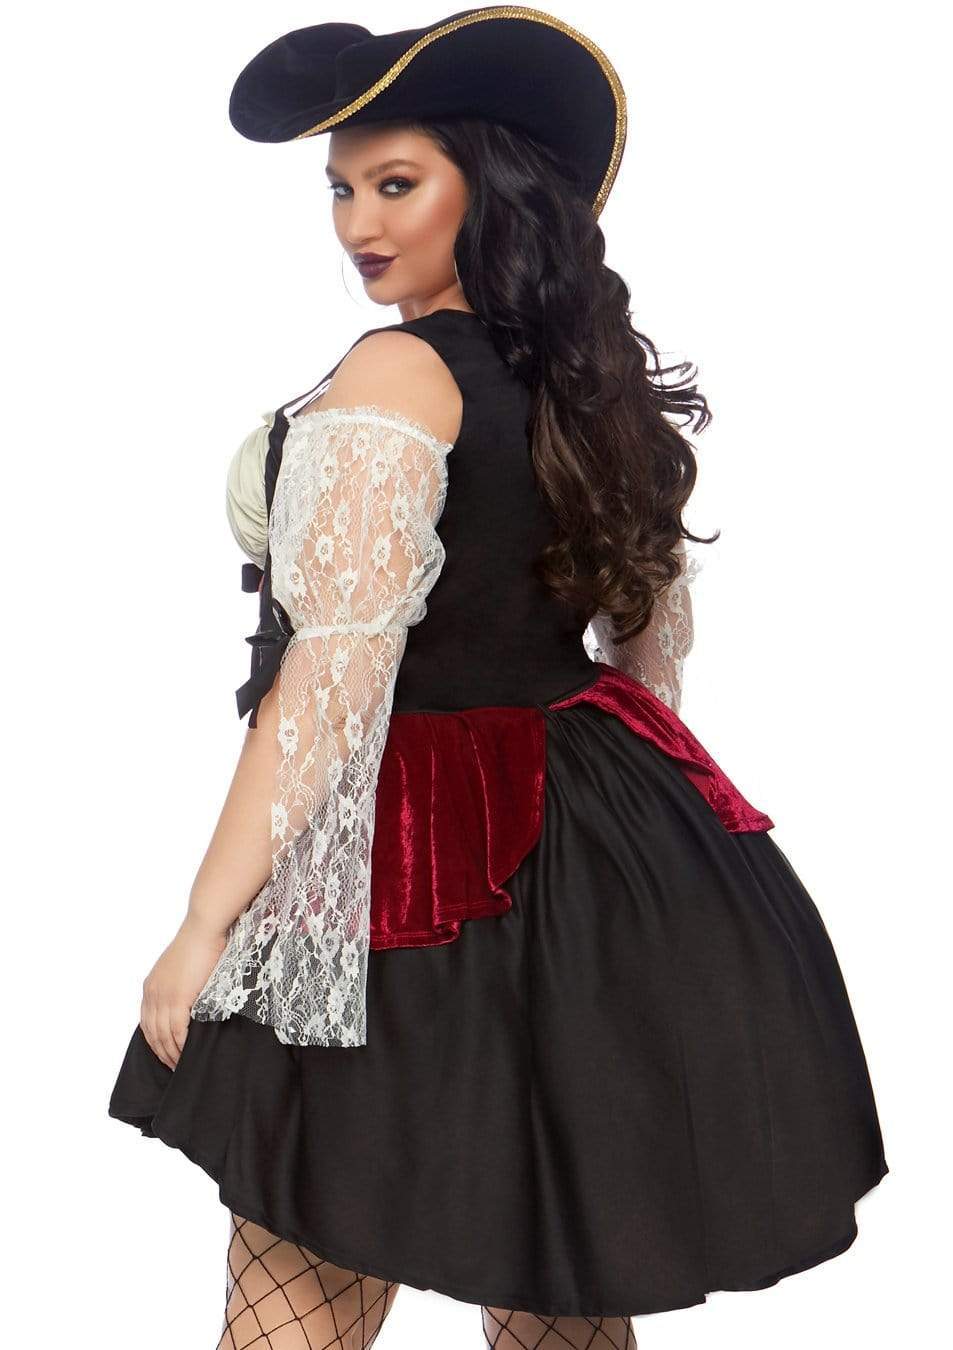 Wicked Wench Pirate Peasant High-Low Plus Dress with Ruffle Trim